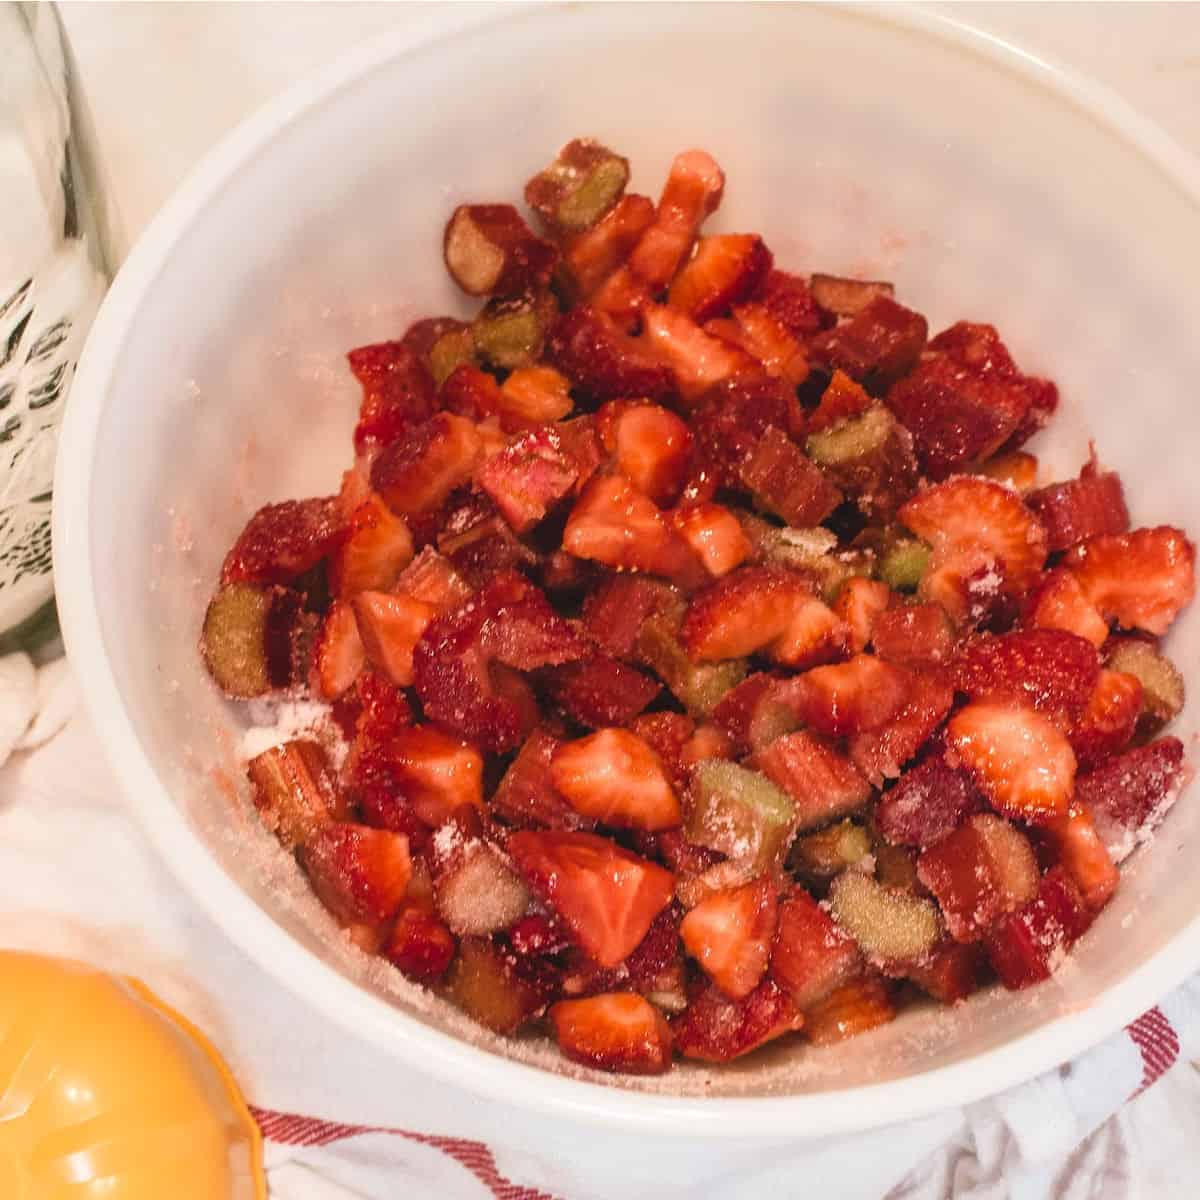 chopped fresh rhubarb and fresh strawberries sprinkled with sugar in large bowl.